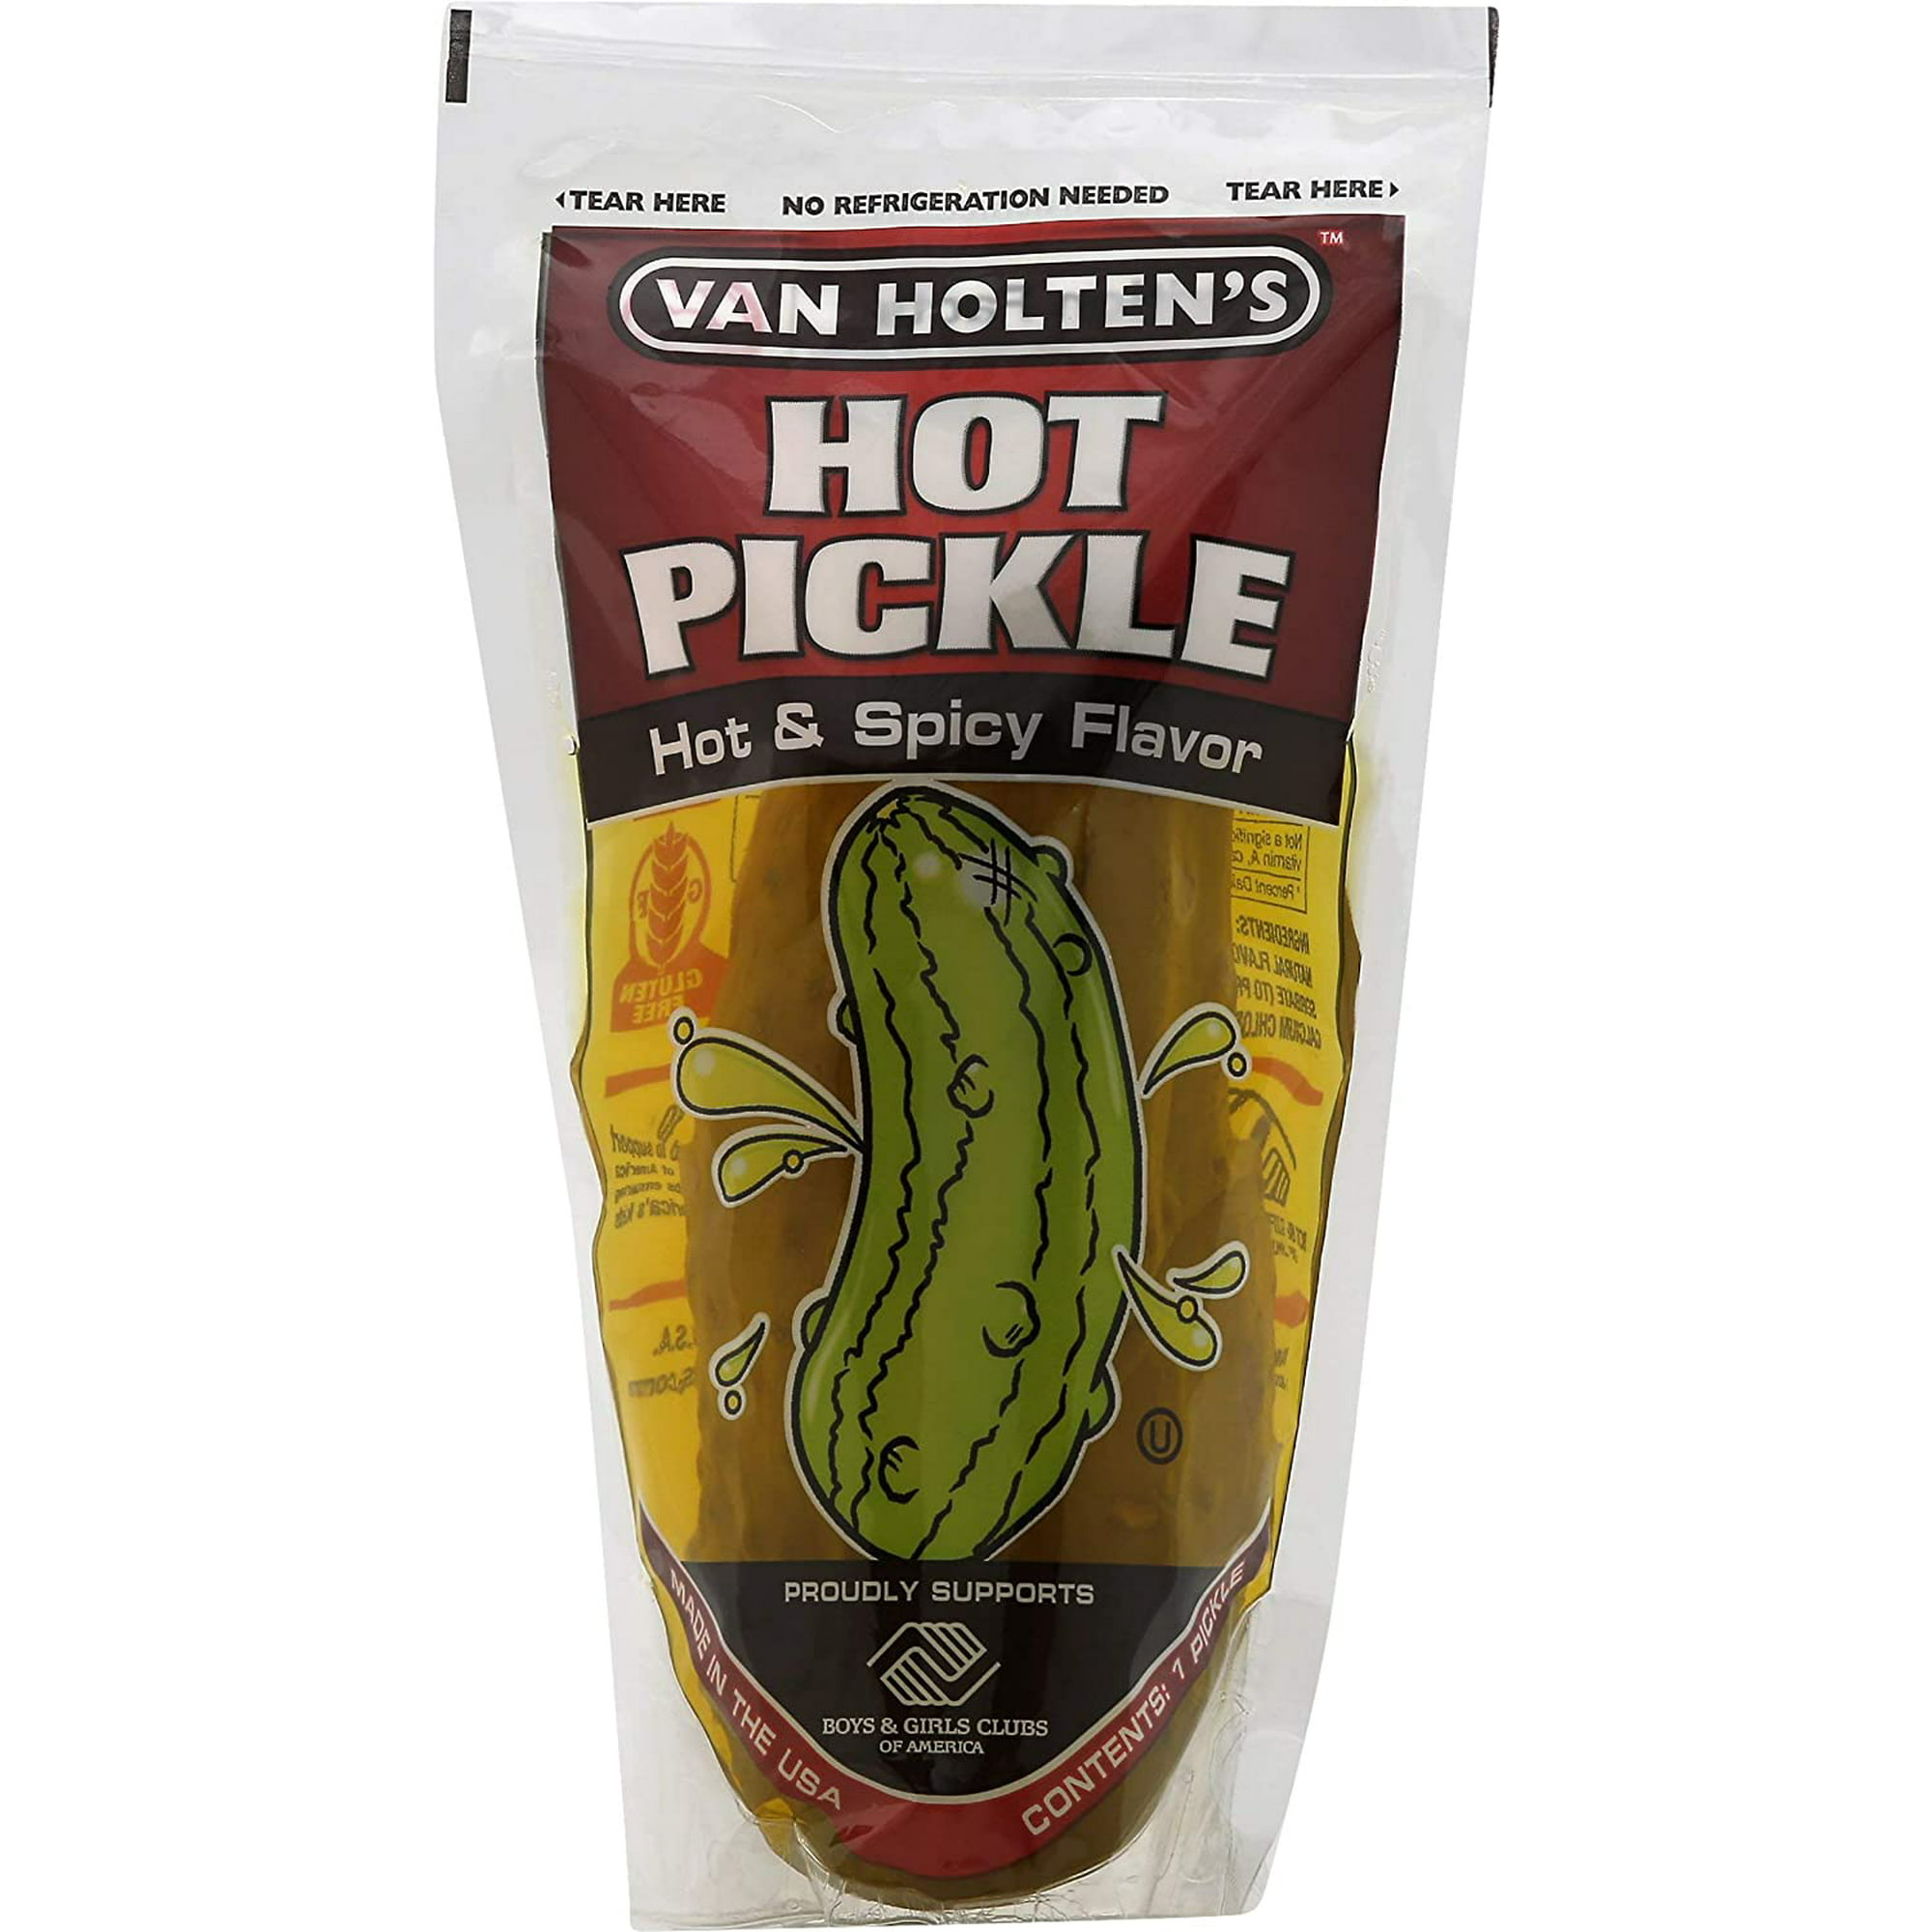 Van-Holtens-Pickle-In-A-Pouch-Jumbo-Hot-Pickles-12-Pack_853d6e58-396f-4311-8db1-1589ee6eec44.c0e1fcc1478c093e2a92e2cd7ea0f45b.jpeg